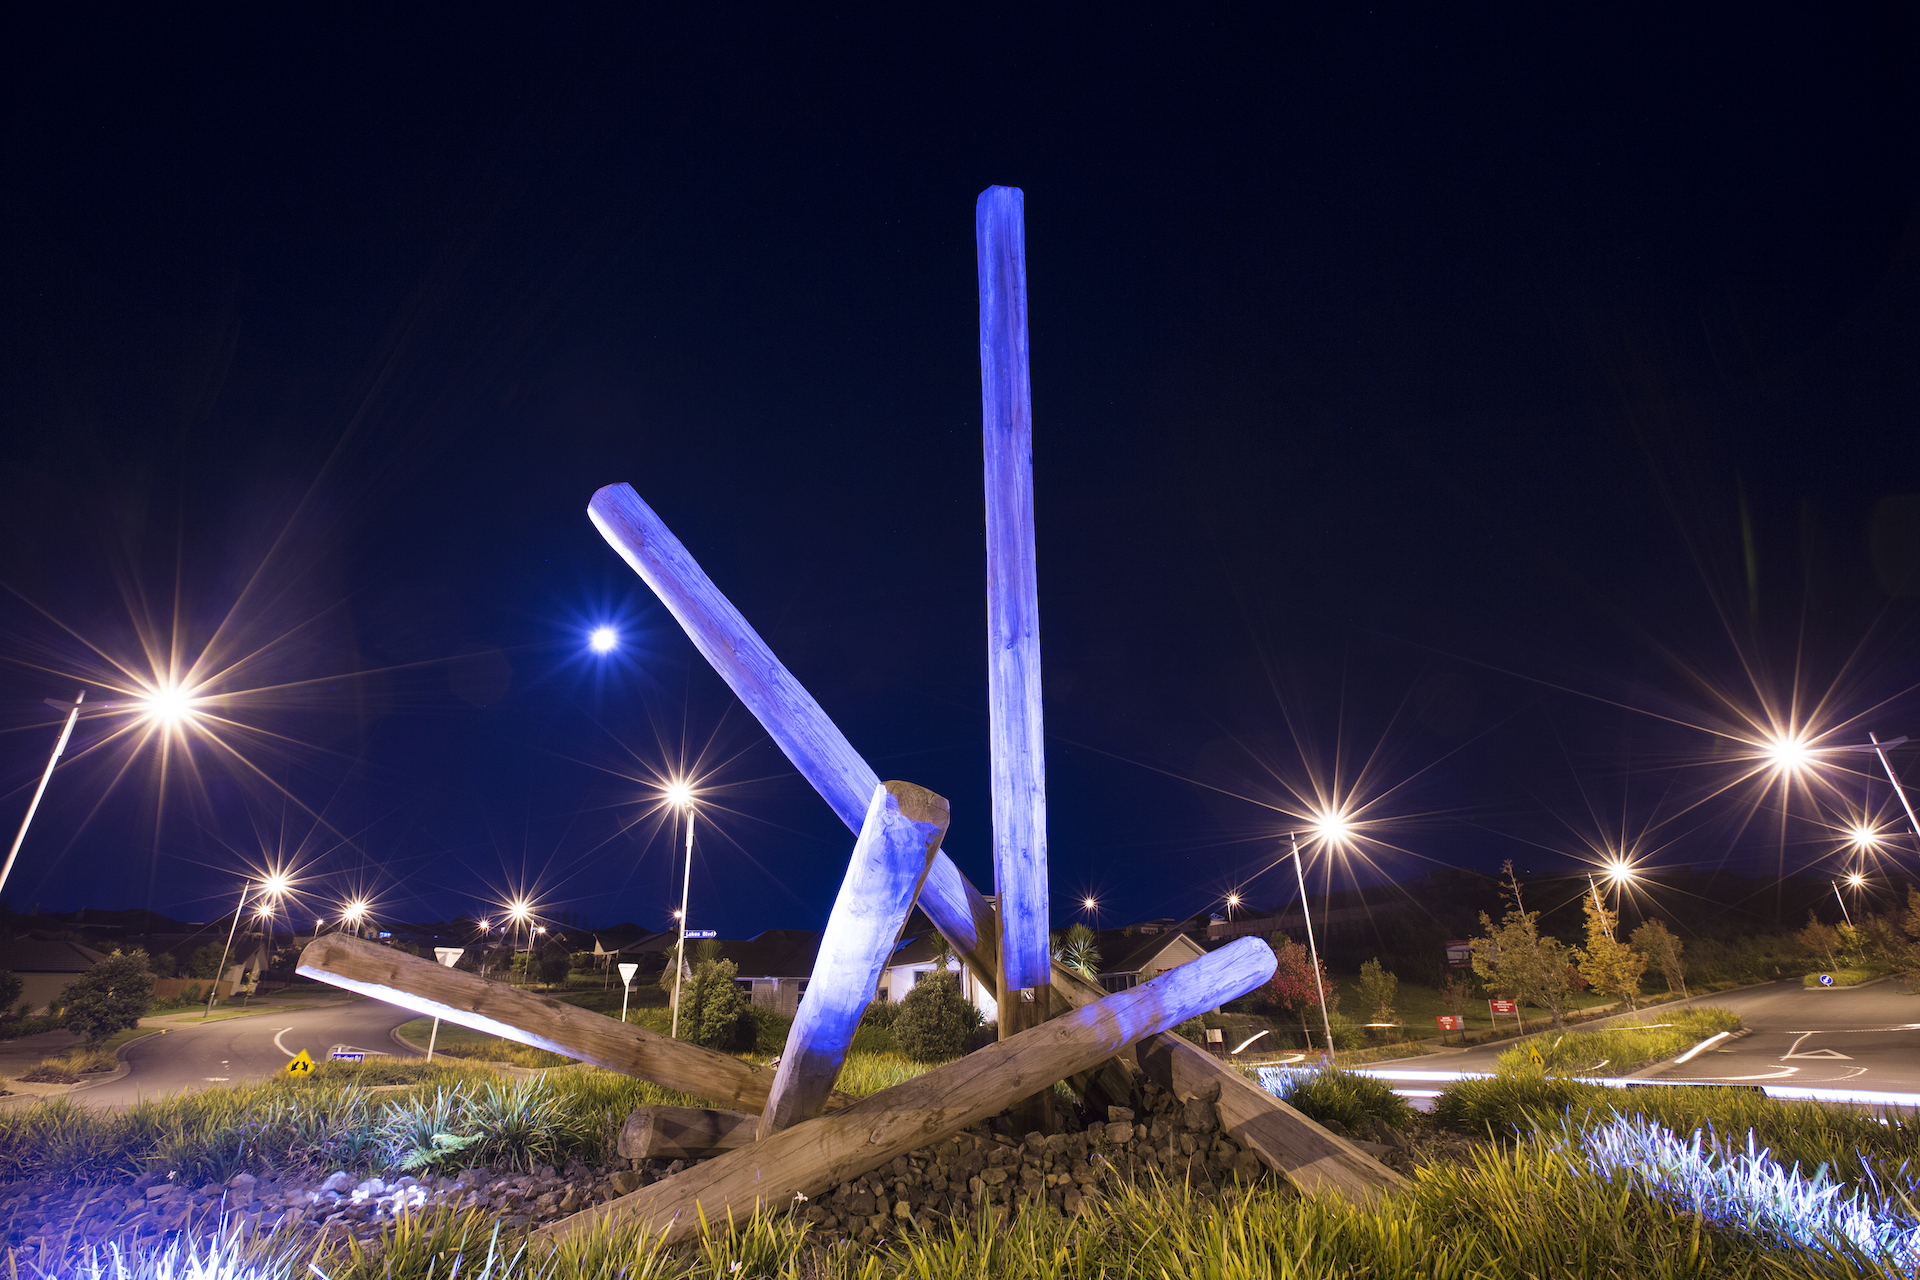 The Lakes roundabout sculpture at night illuminated by ibex lighting solutions.